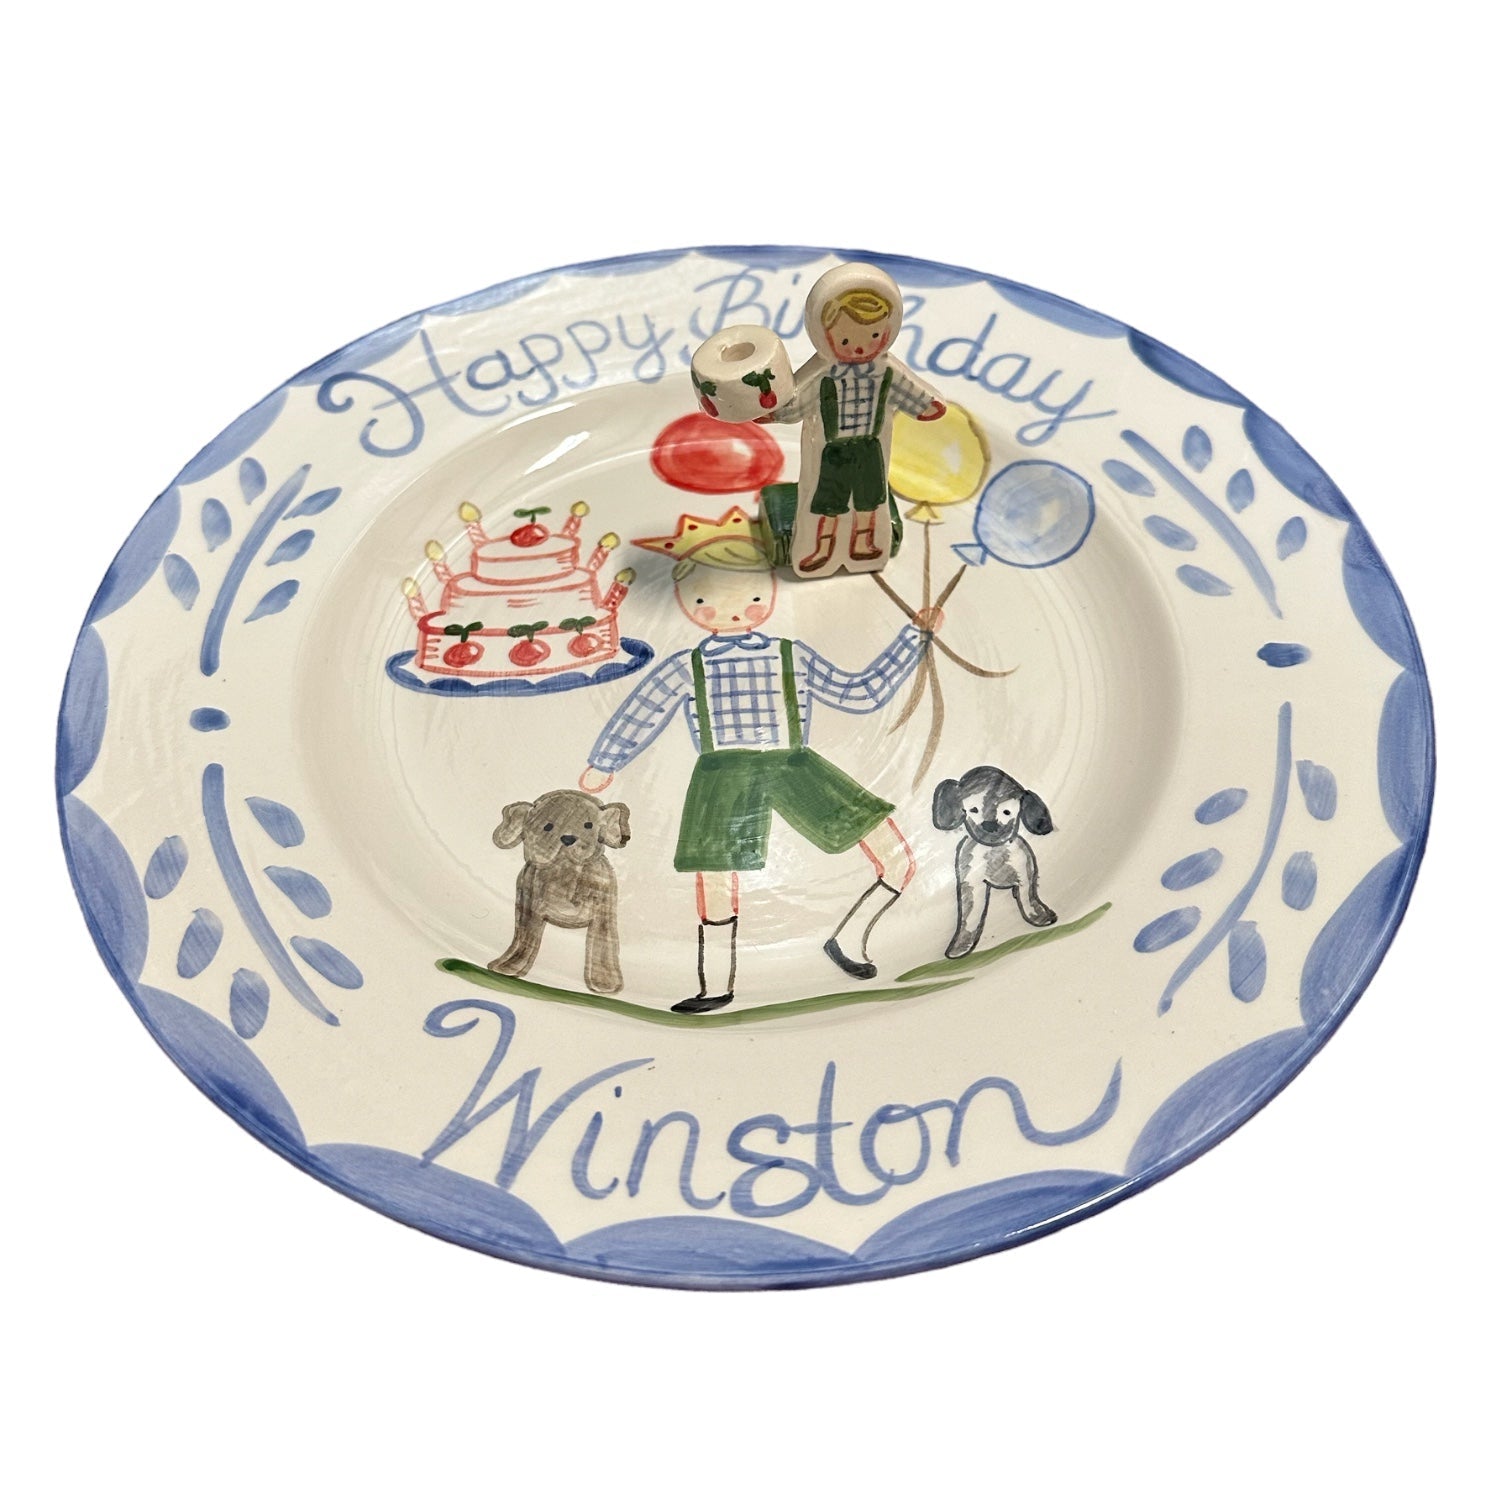 MATCH MY PLATE - Cake Topper - Premium Cake Topper from Tricia Lowenfield Design 